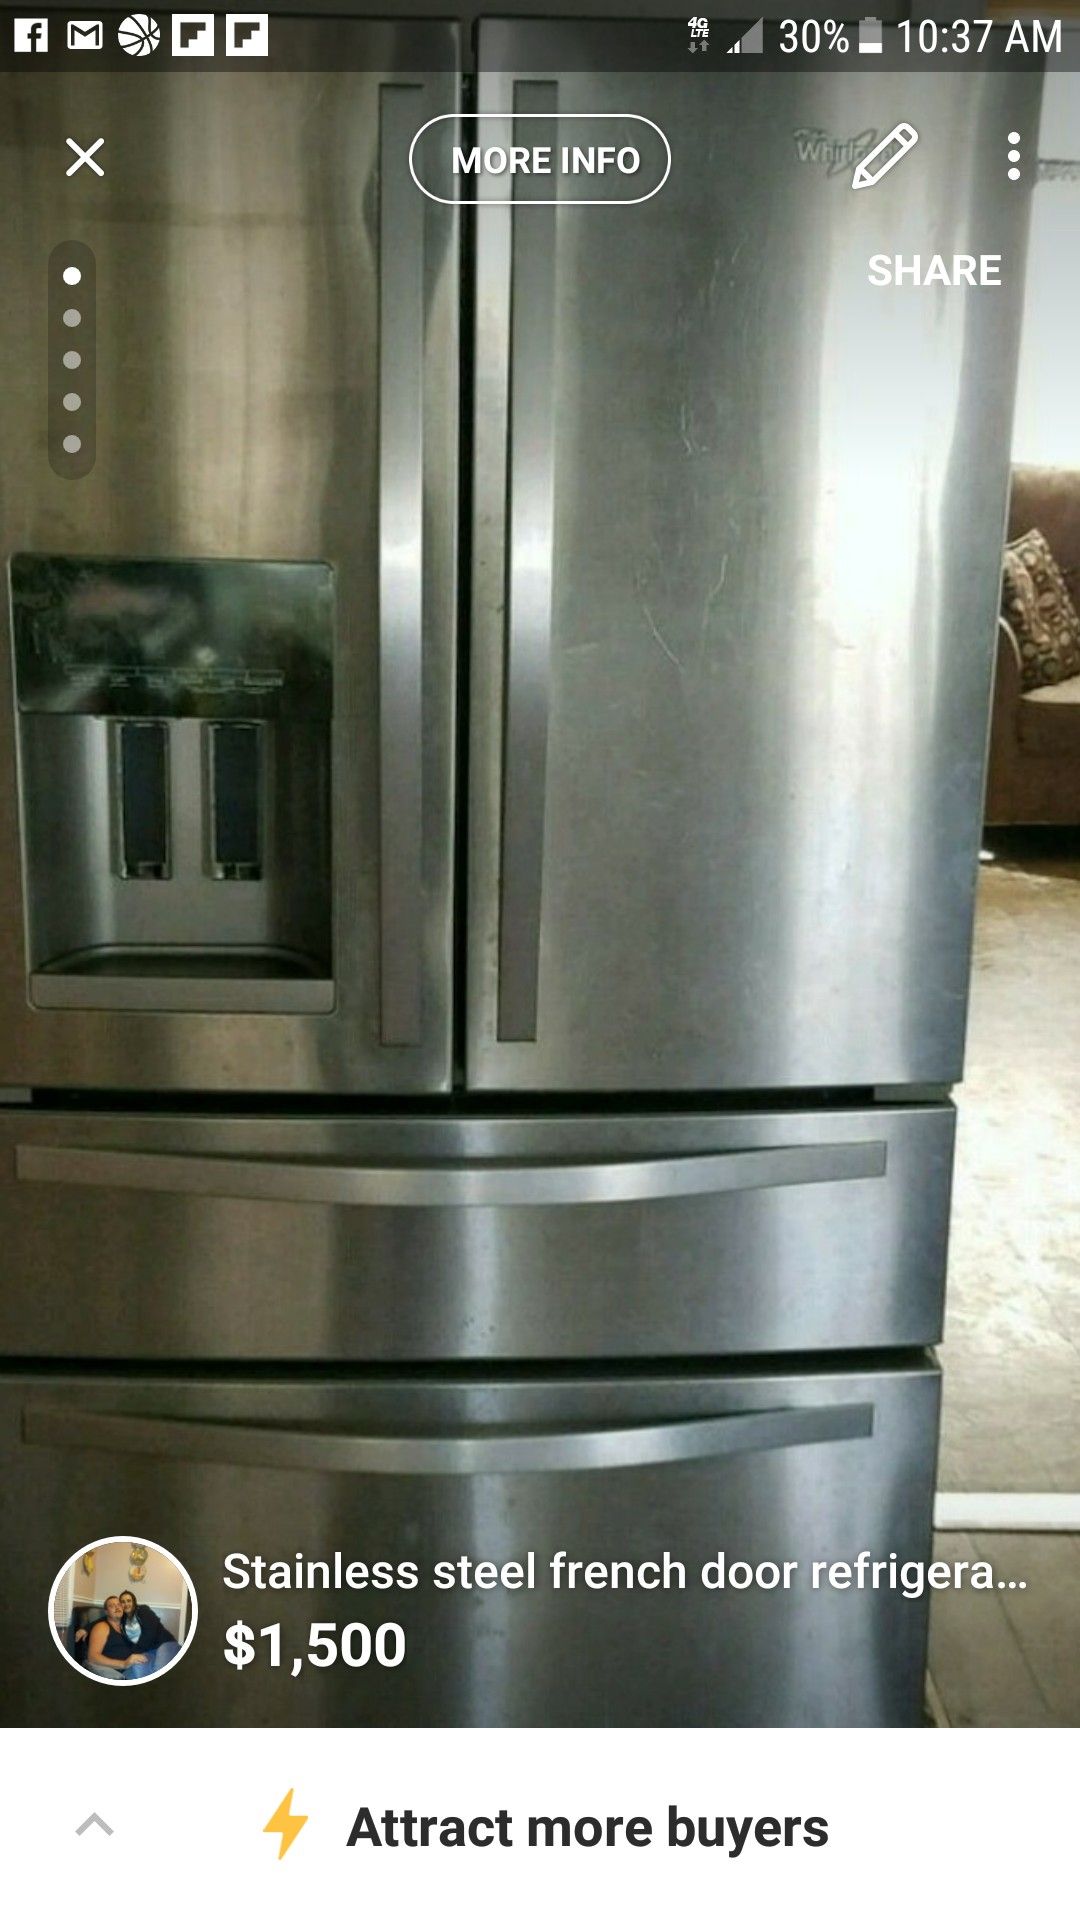 Whirlpool French door refrigerator with ice maker and water